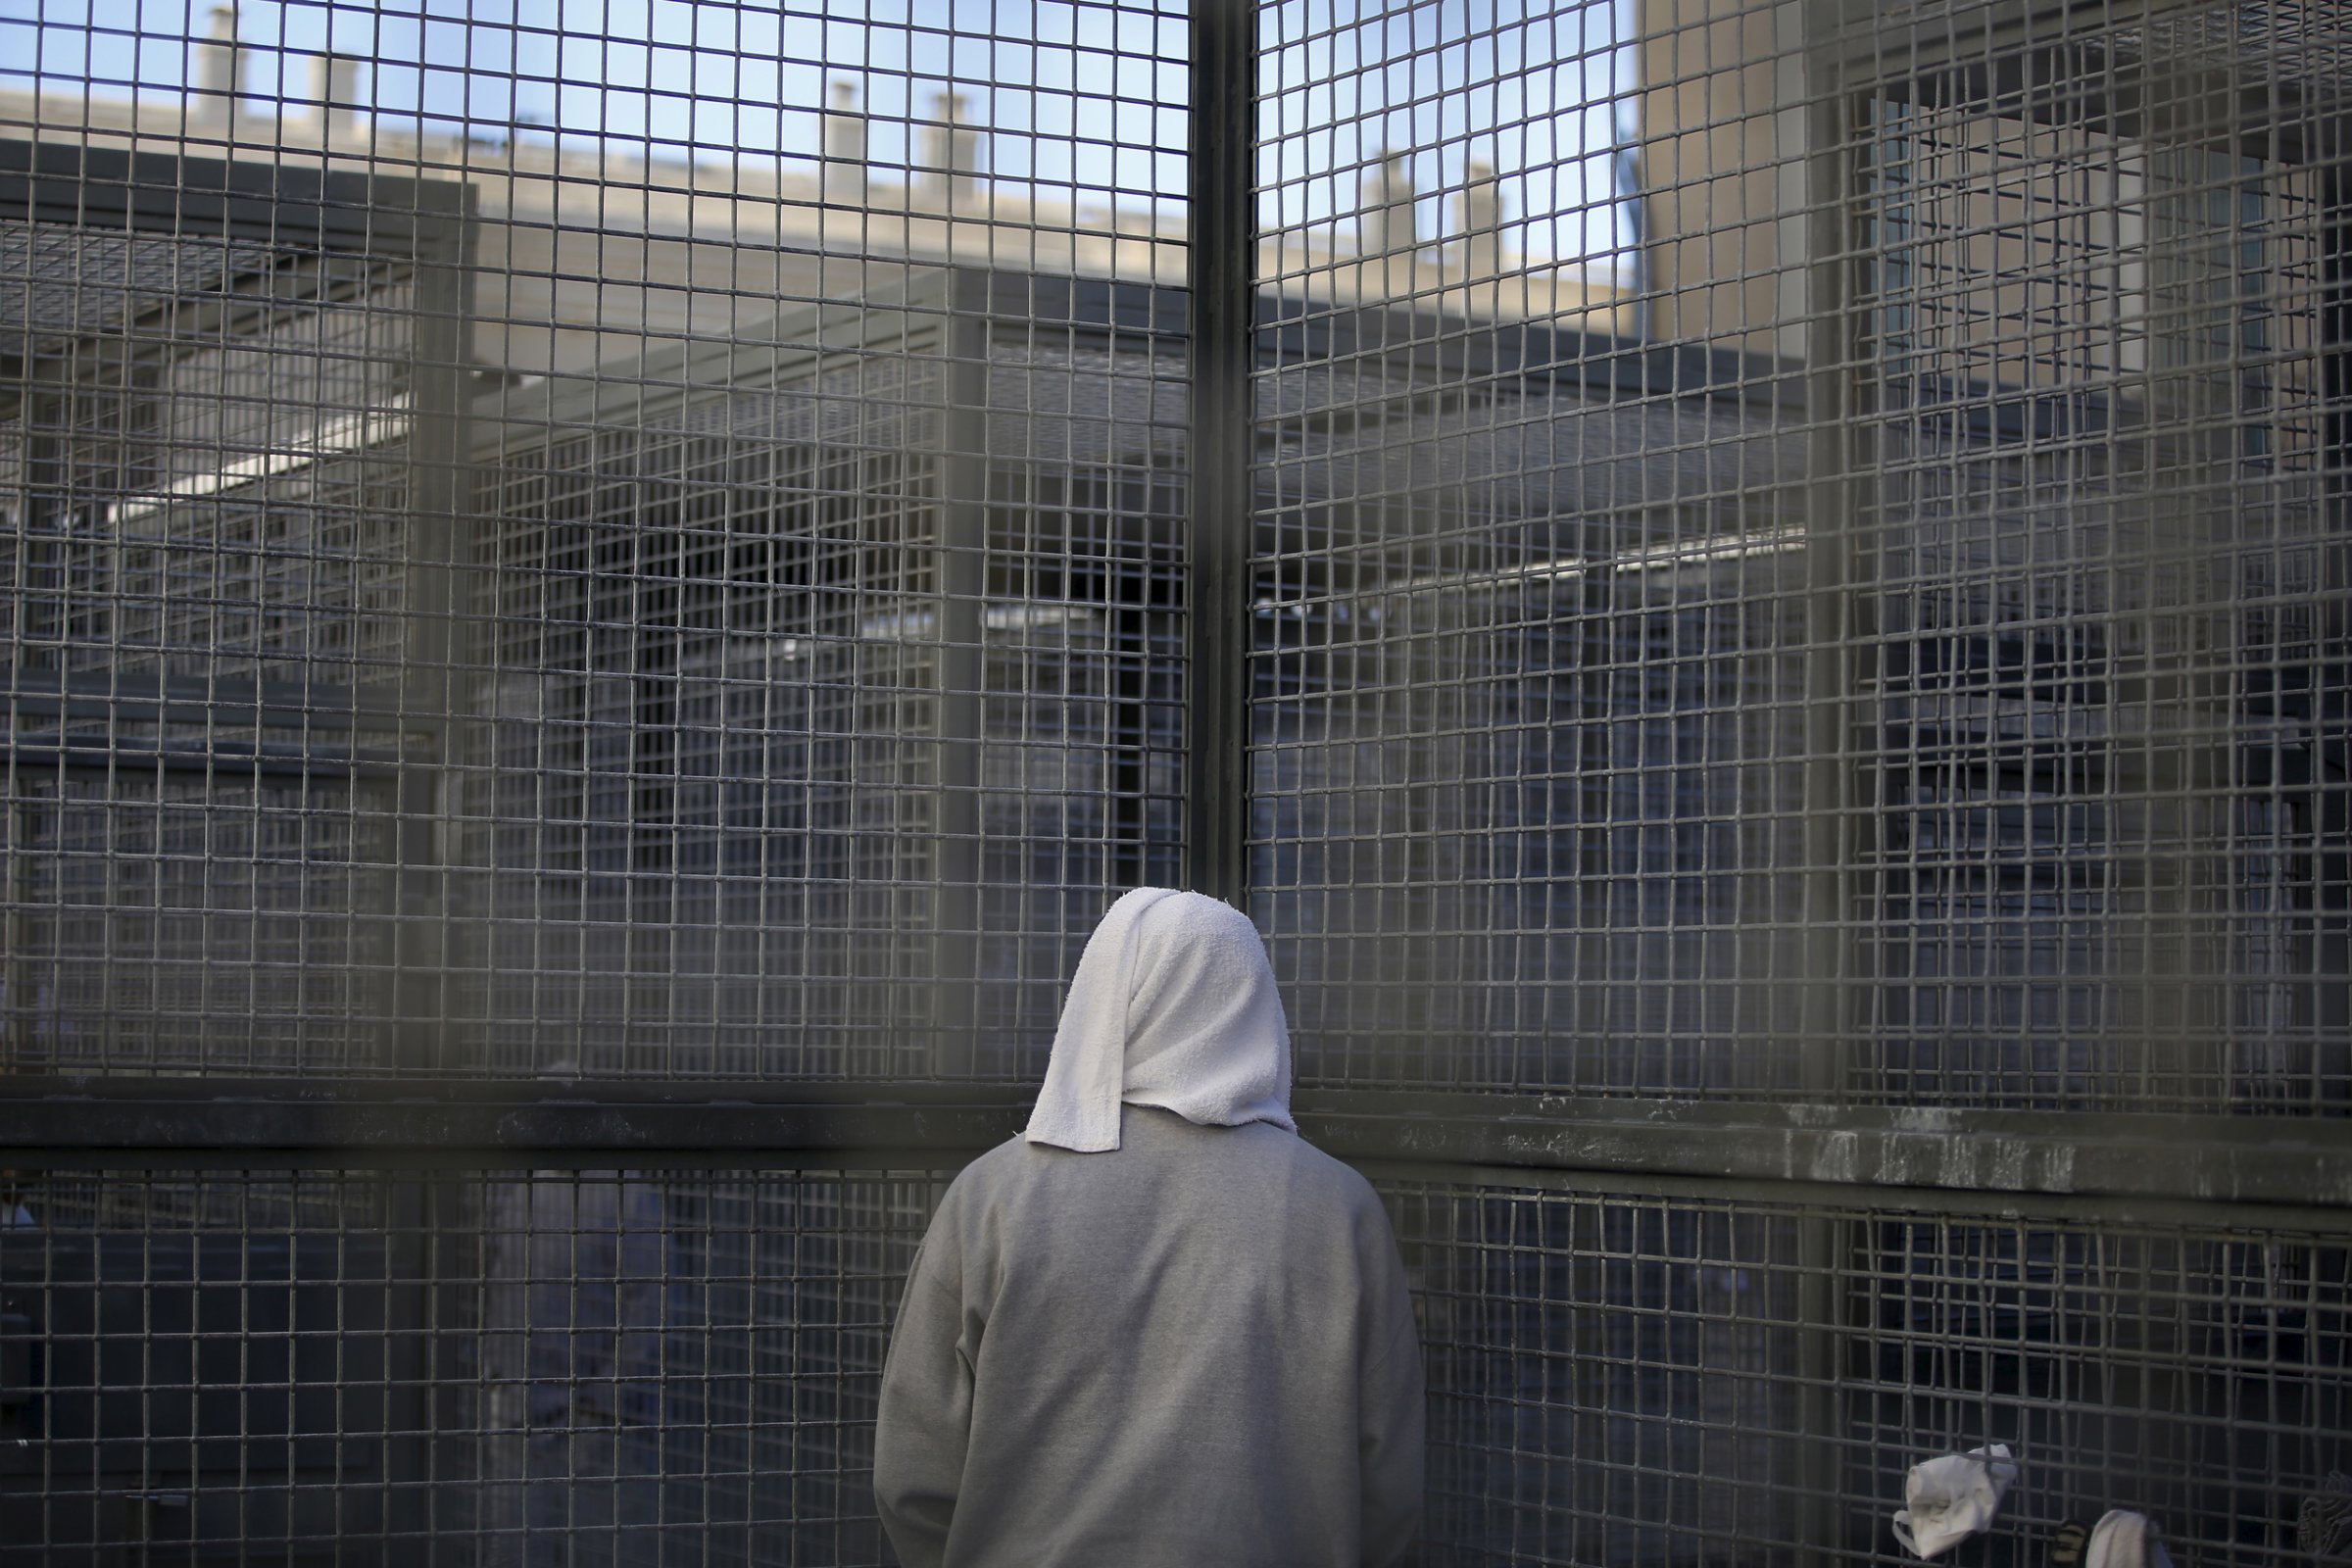 An inmate stands against a fence at the Adjustment Center yard during a media tour of California's death row at San Quentin State Prison in San Quentin, California December 29, 2015. America's most populous state, which has not carried out an execution in a decade, begins 2016 at a pivotal juncture, as legal developments hasten the march toward resuming executions, while opponents seek to end the death penalty at the ballot box. To match Feature CALIFORNIA-DEATH-PENALTY/ Picture taken December 29, 2015. REUTERS/Stephen Lam - RTX21EE0